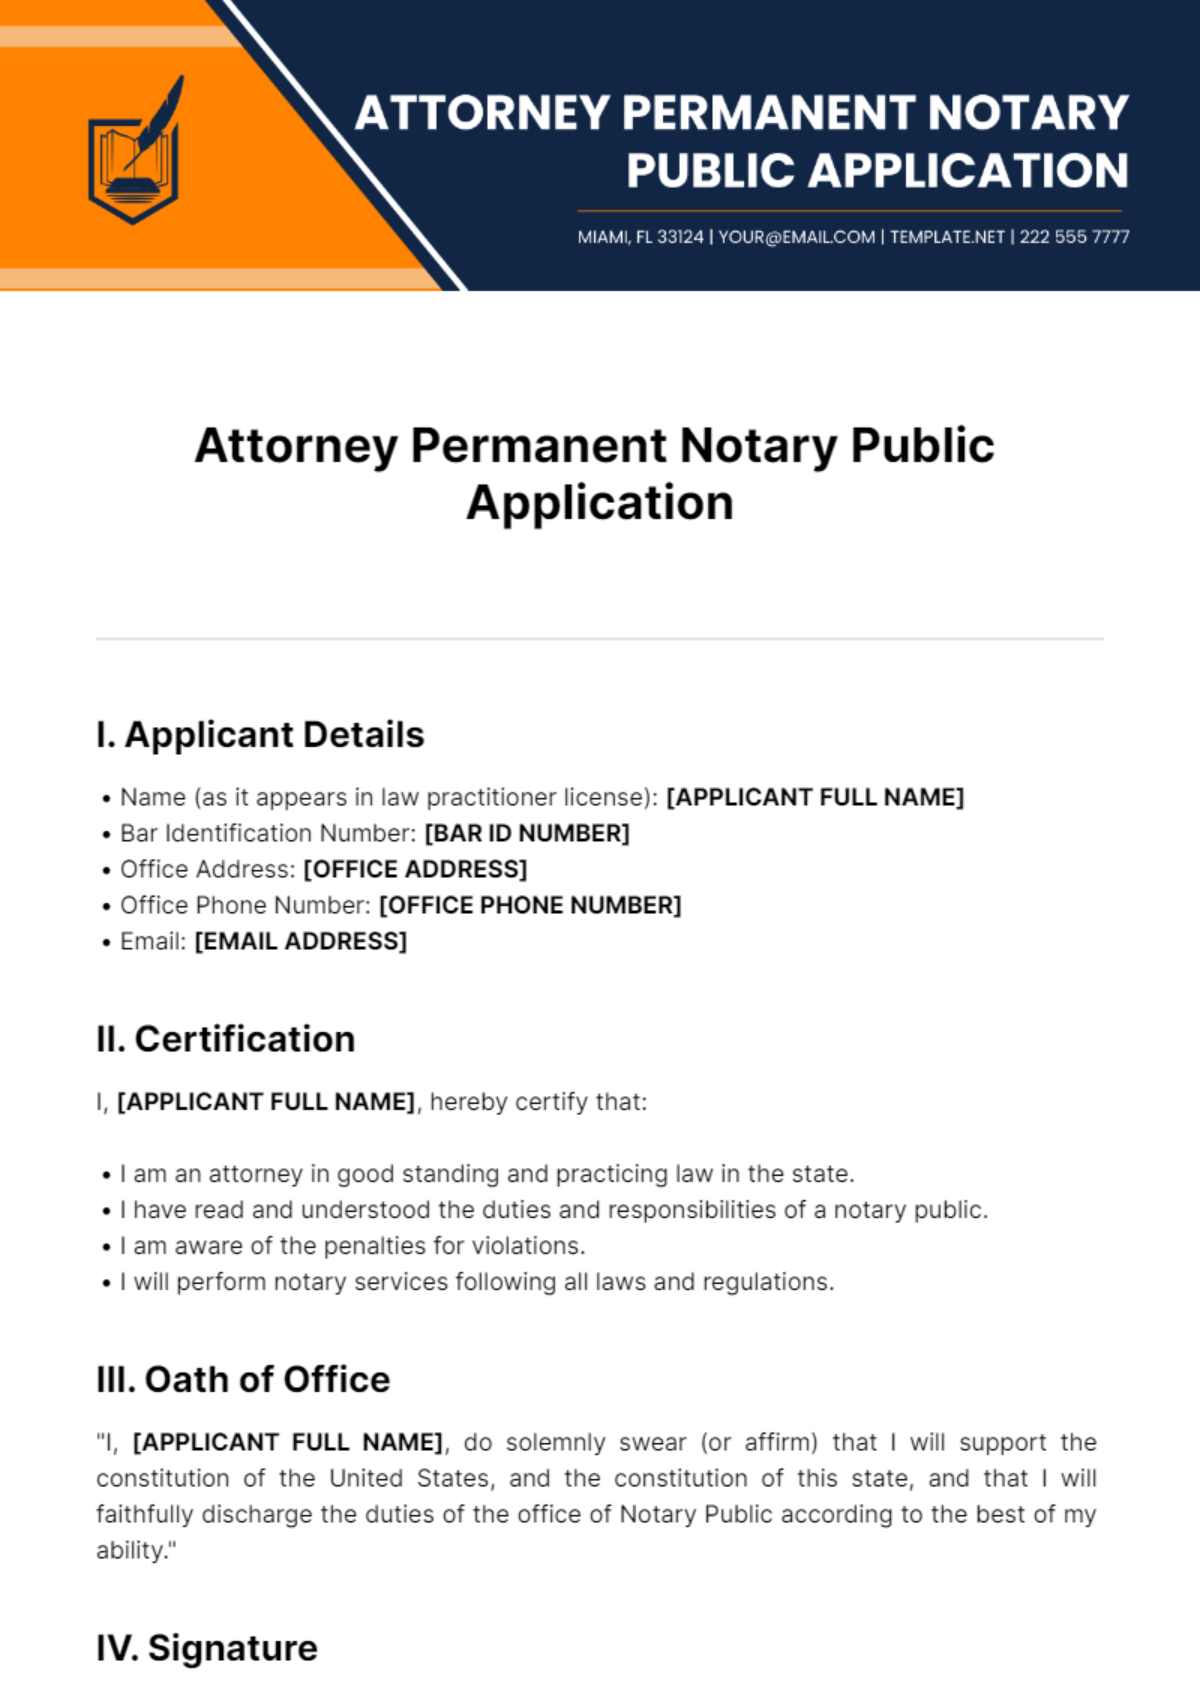 Free Attorney Permanent Notary Public Application Template